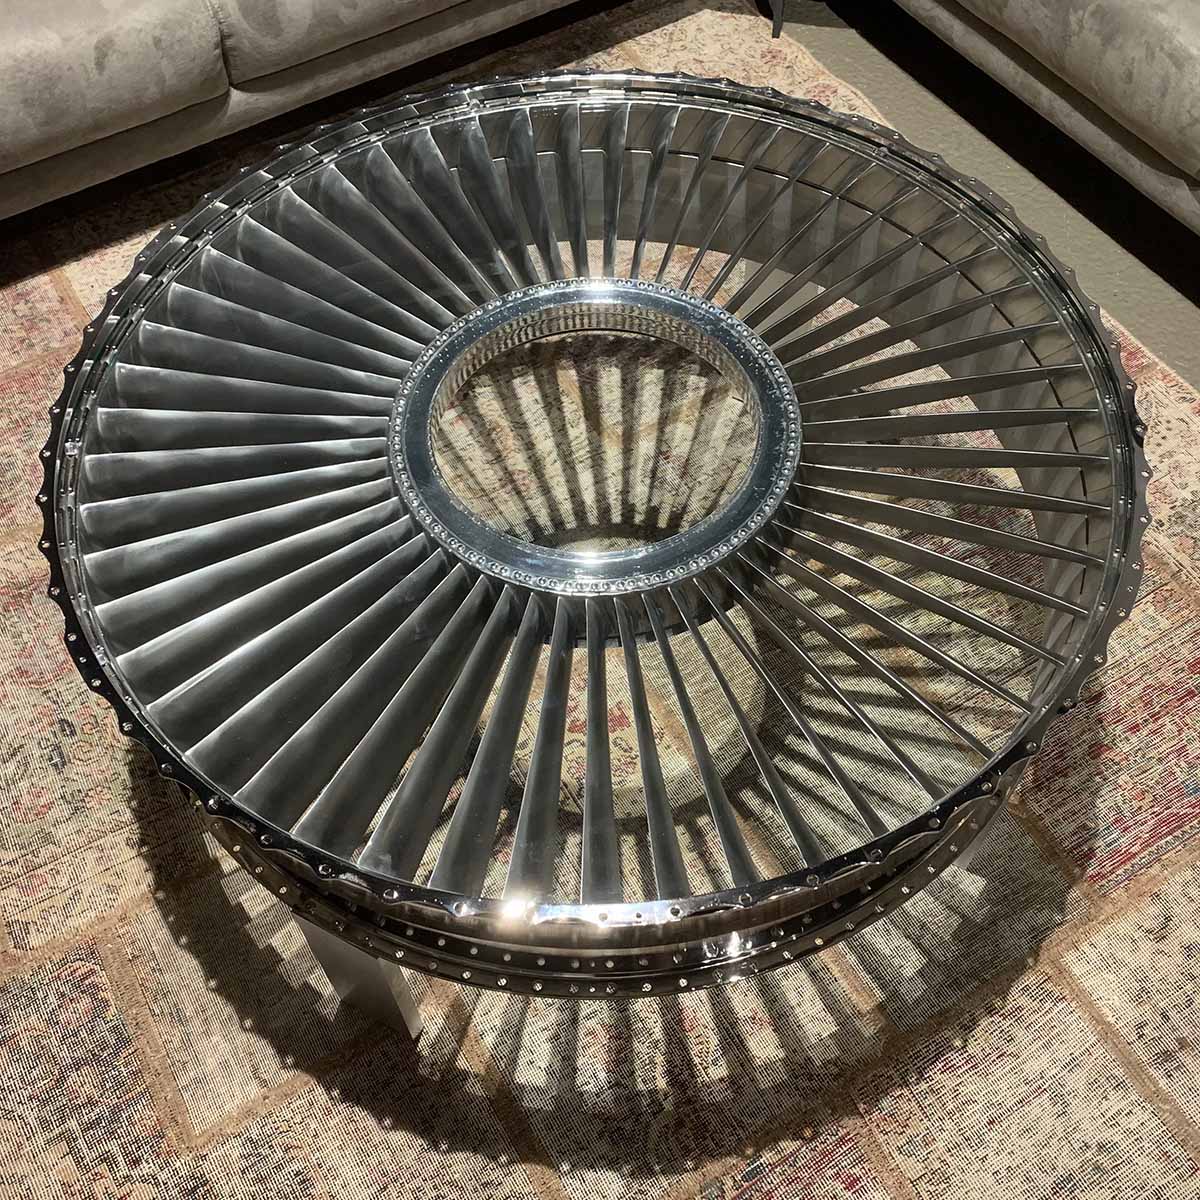 Polished rear fan case of a P&W JT8D turned into a table for sale.